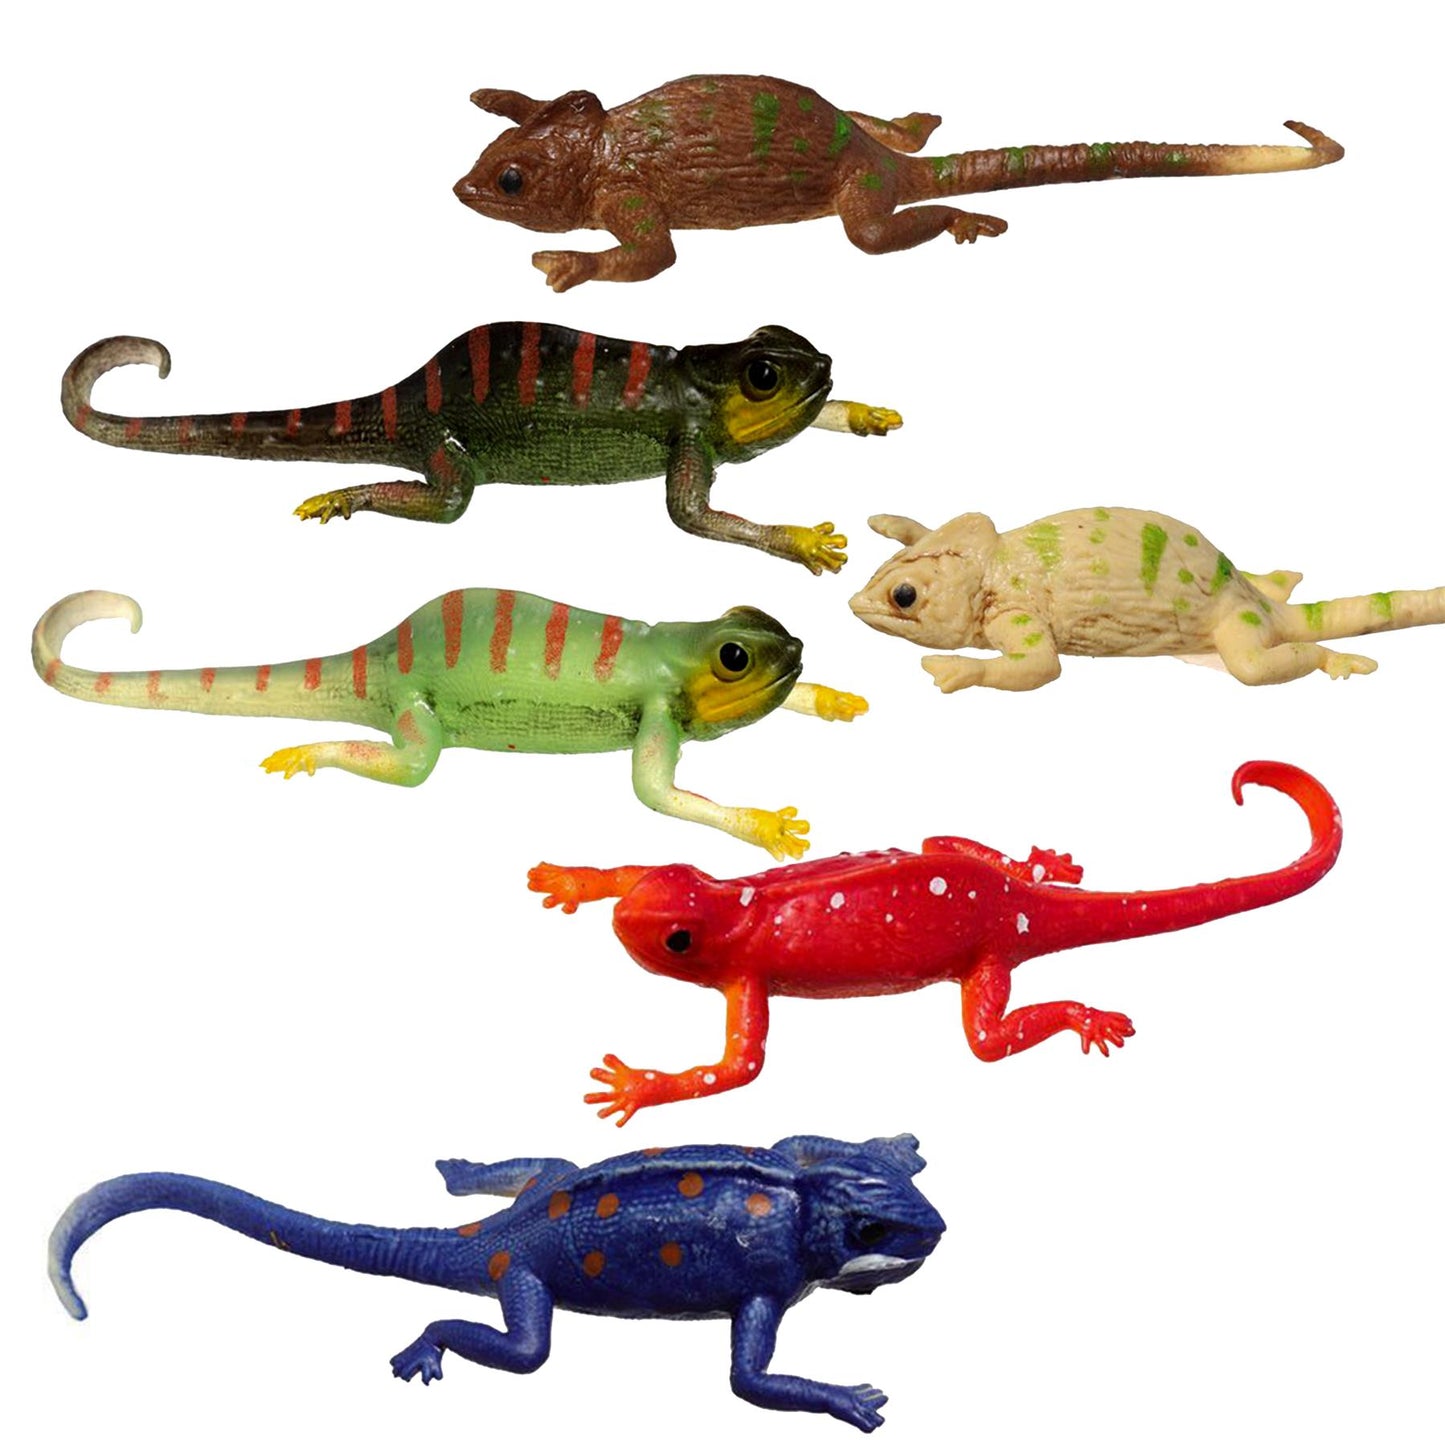 Colour Changing Chameleon Lizard Pocket Money Toy by The Magic Toy Shop - UKBuyZone